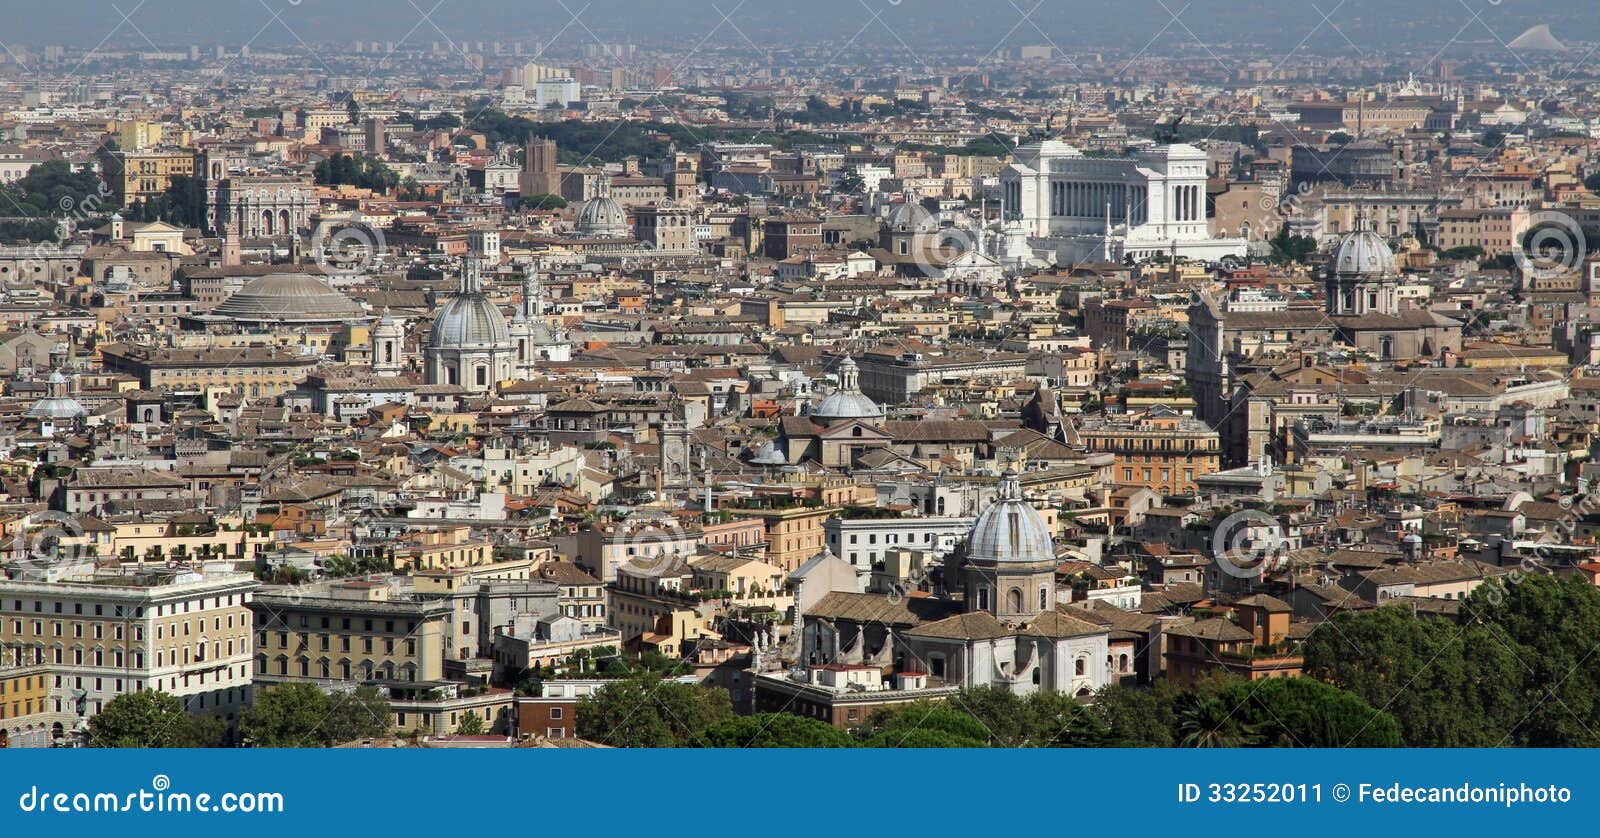 panoramic view of the city of rome from above the dome of the ch